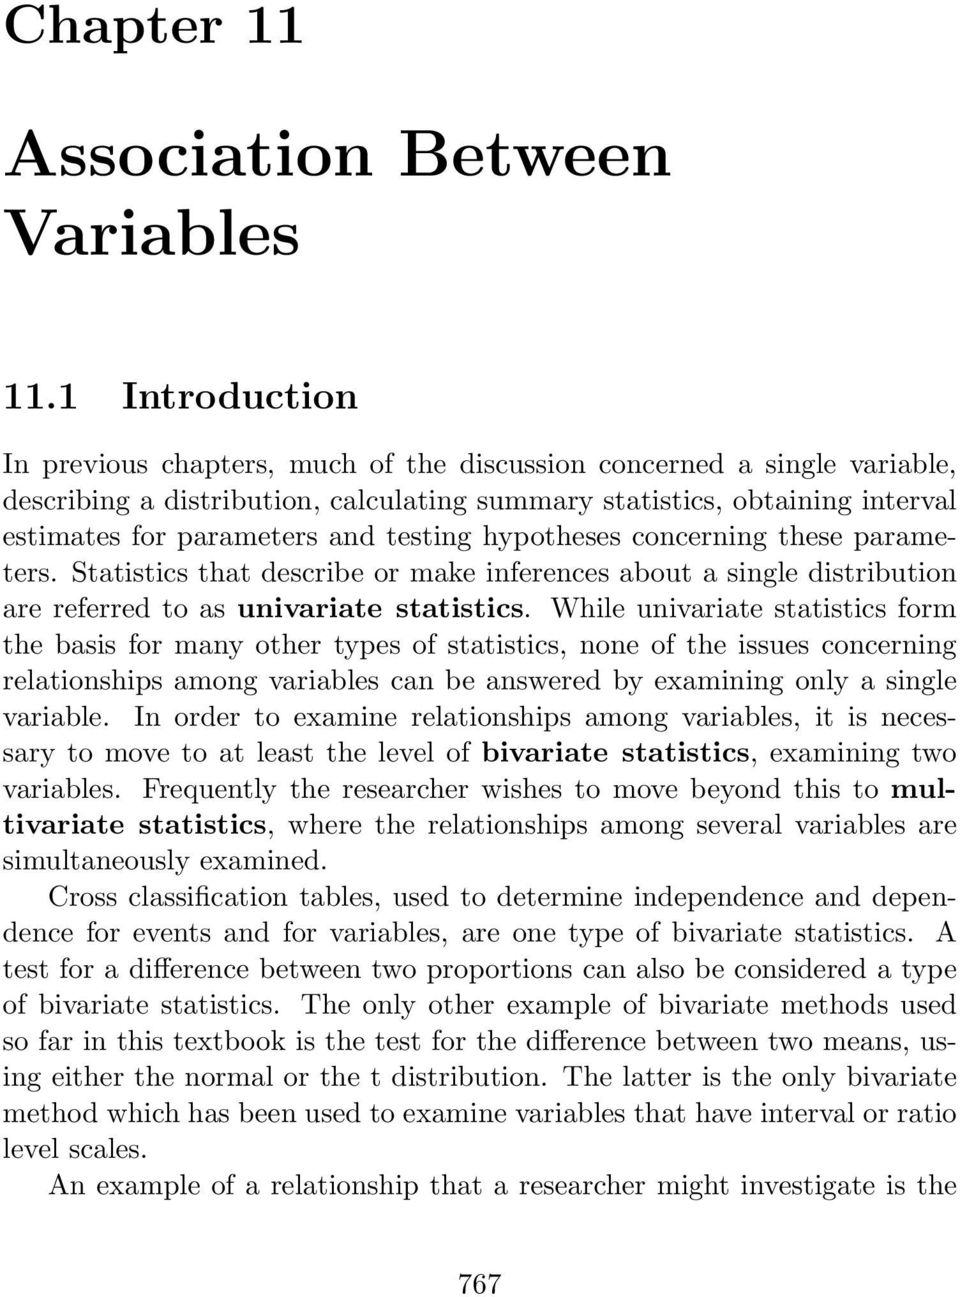 testing hypotheses concerning these parameters. Statistics that describe or make inferences about a single distribution are referred to as univariate statistics.